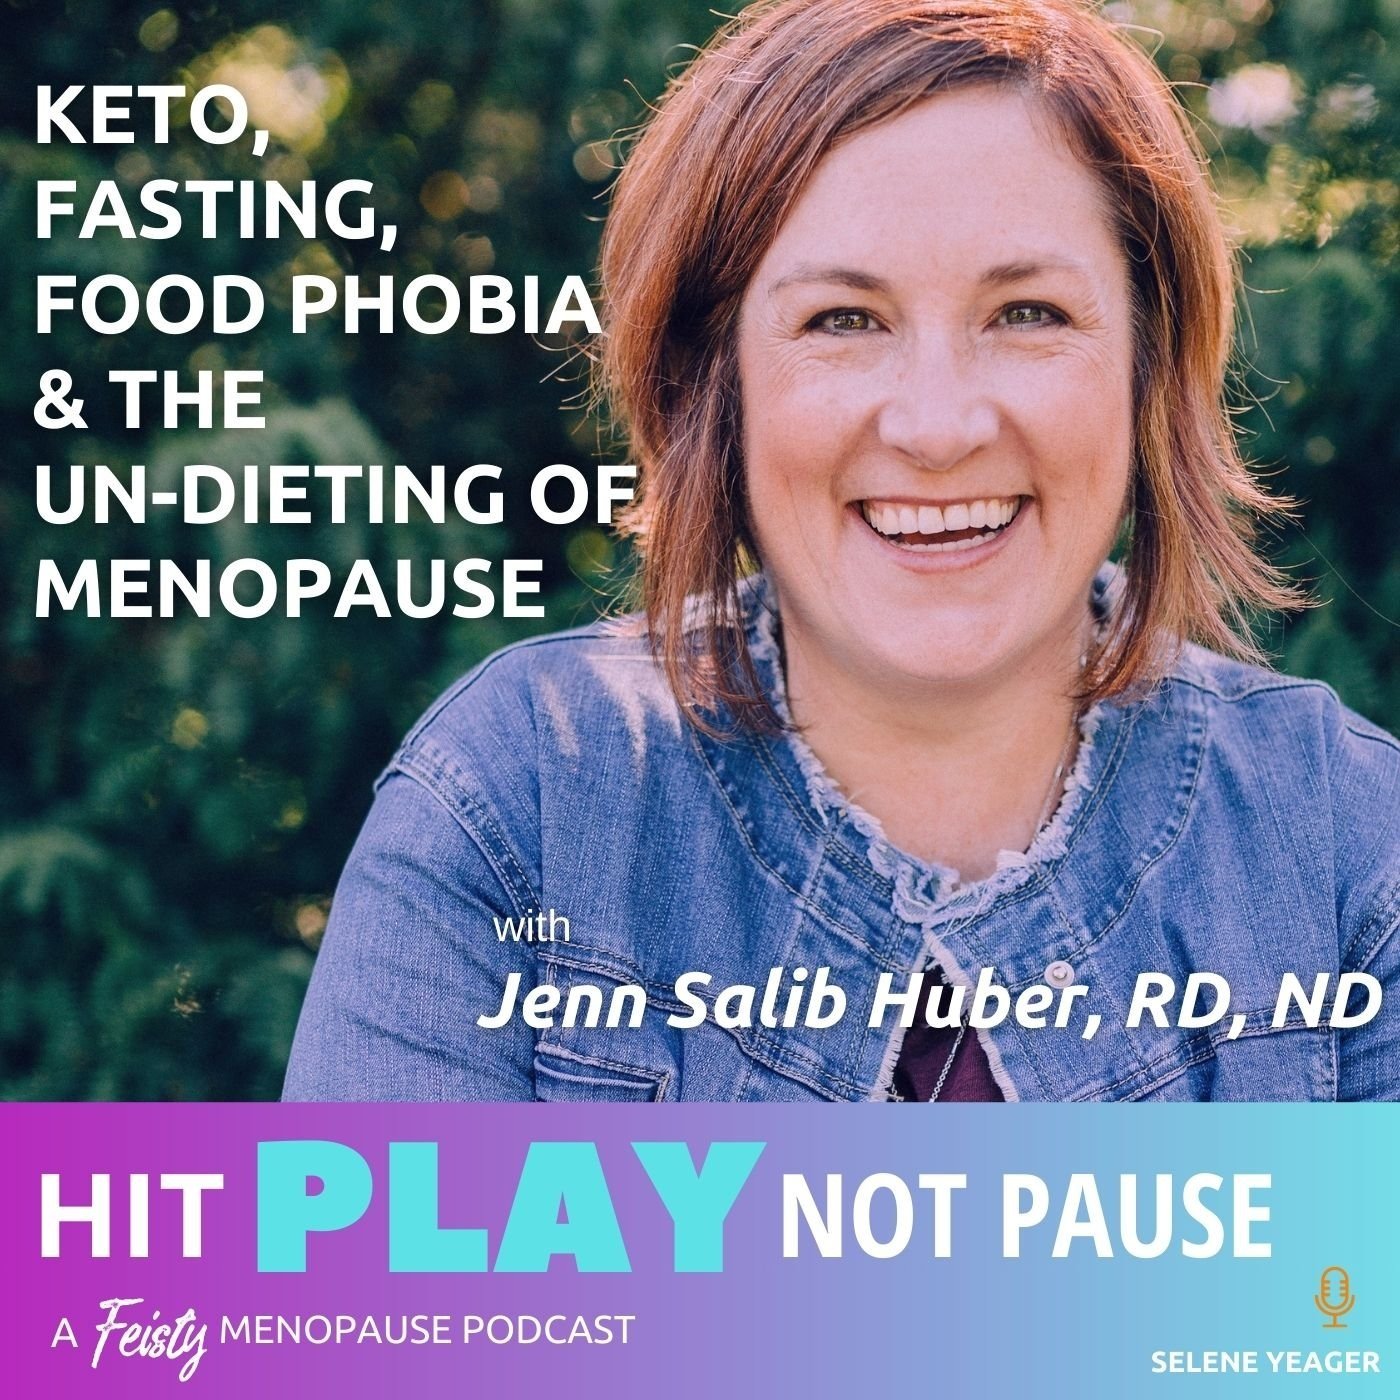 Keto, fasting and the un-dieting of menopause